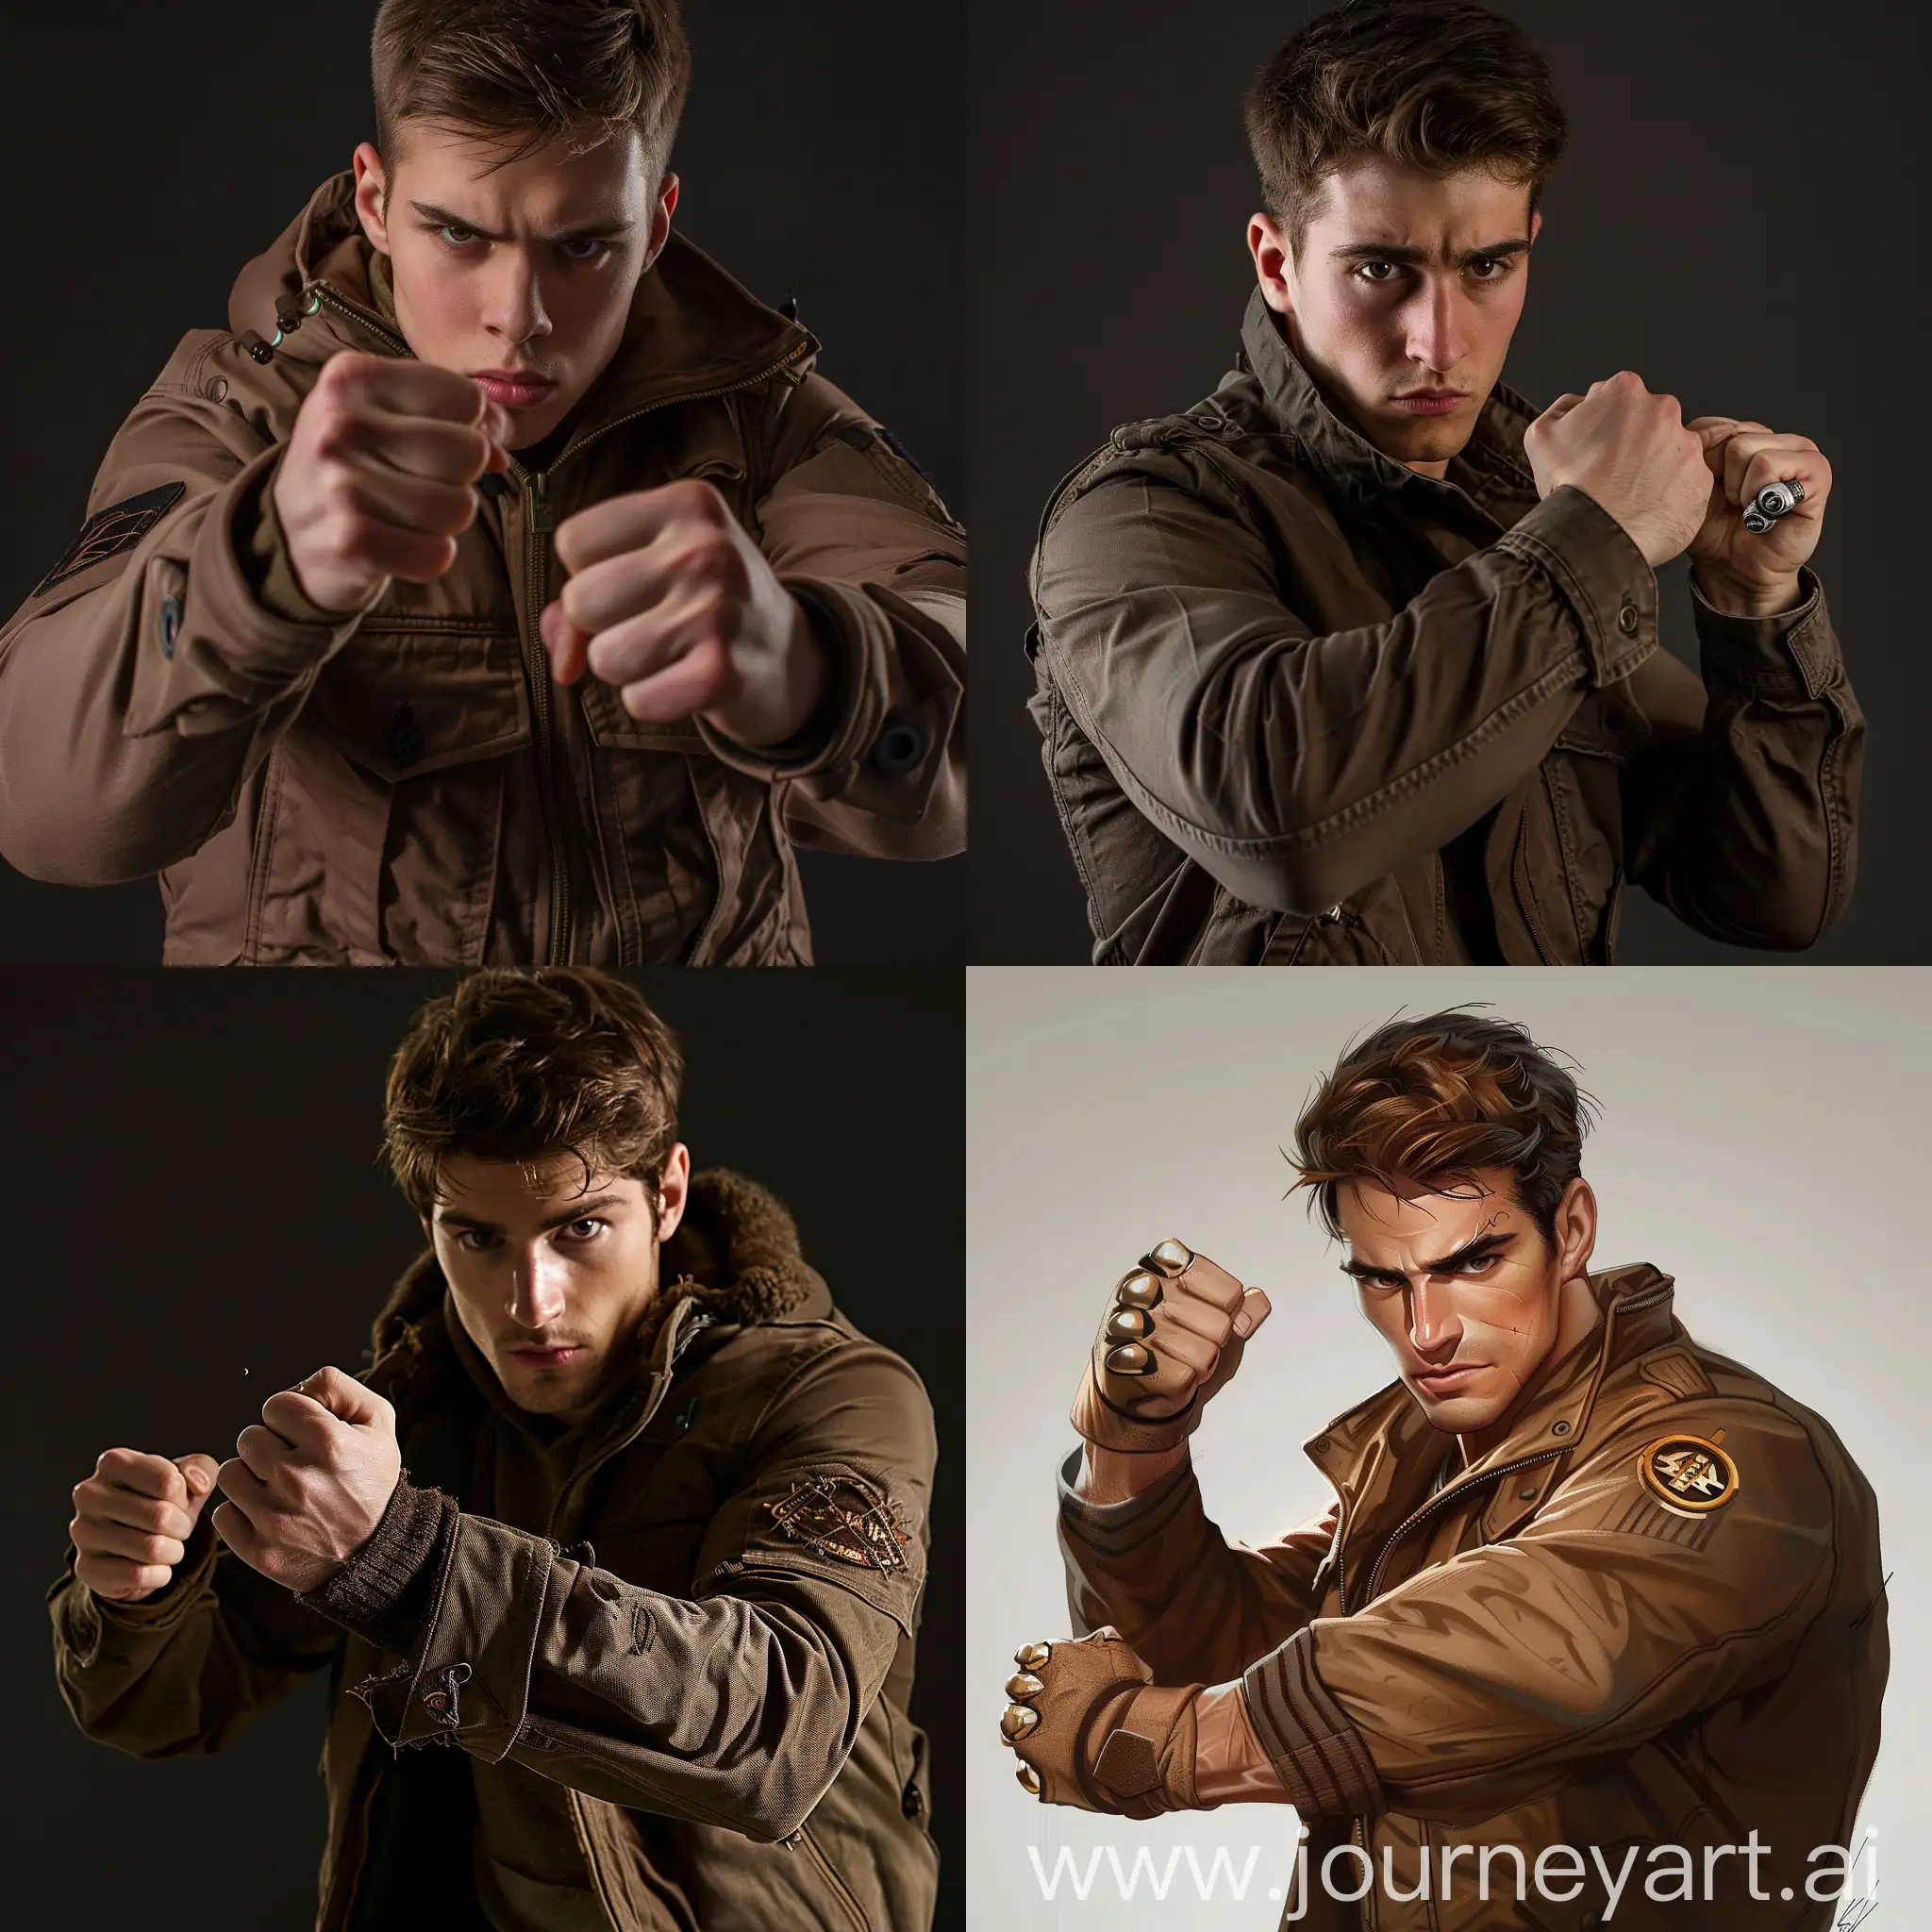 Man with brown hairs and eyes in brown jacket with nuckles in fight pose